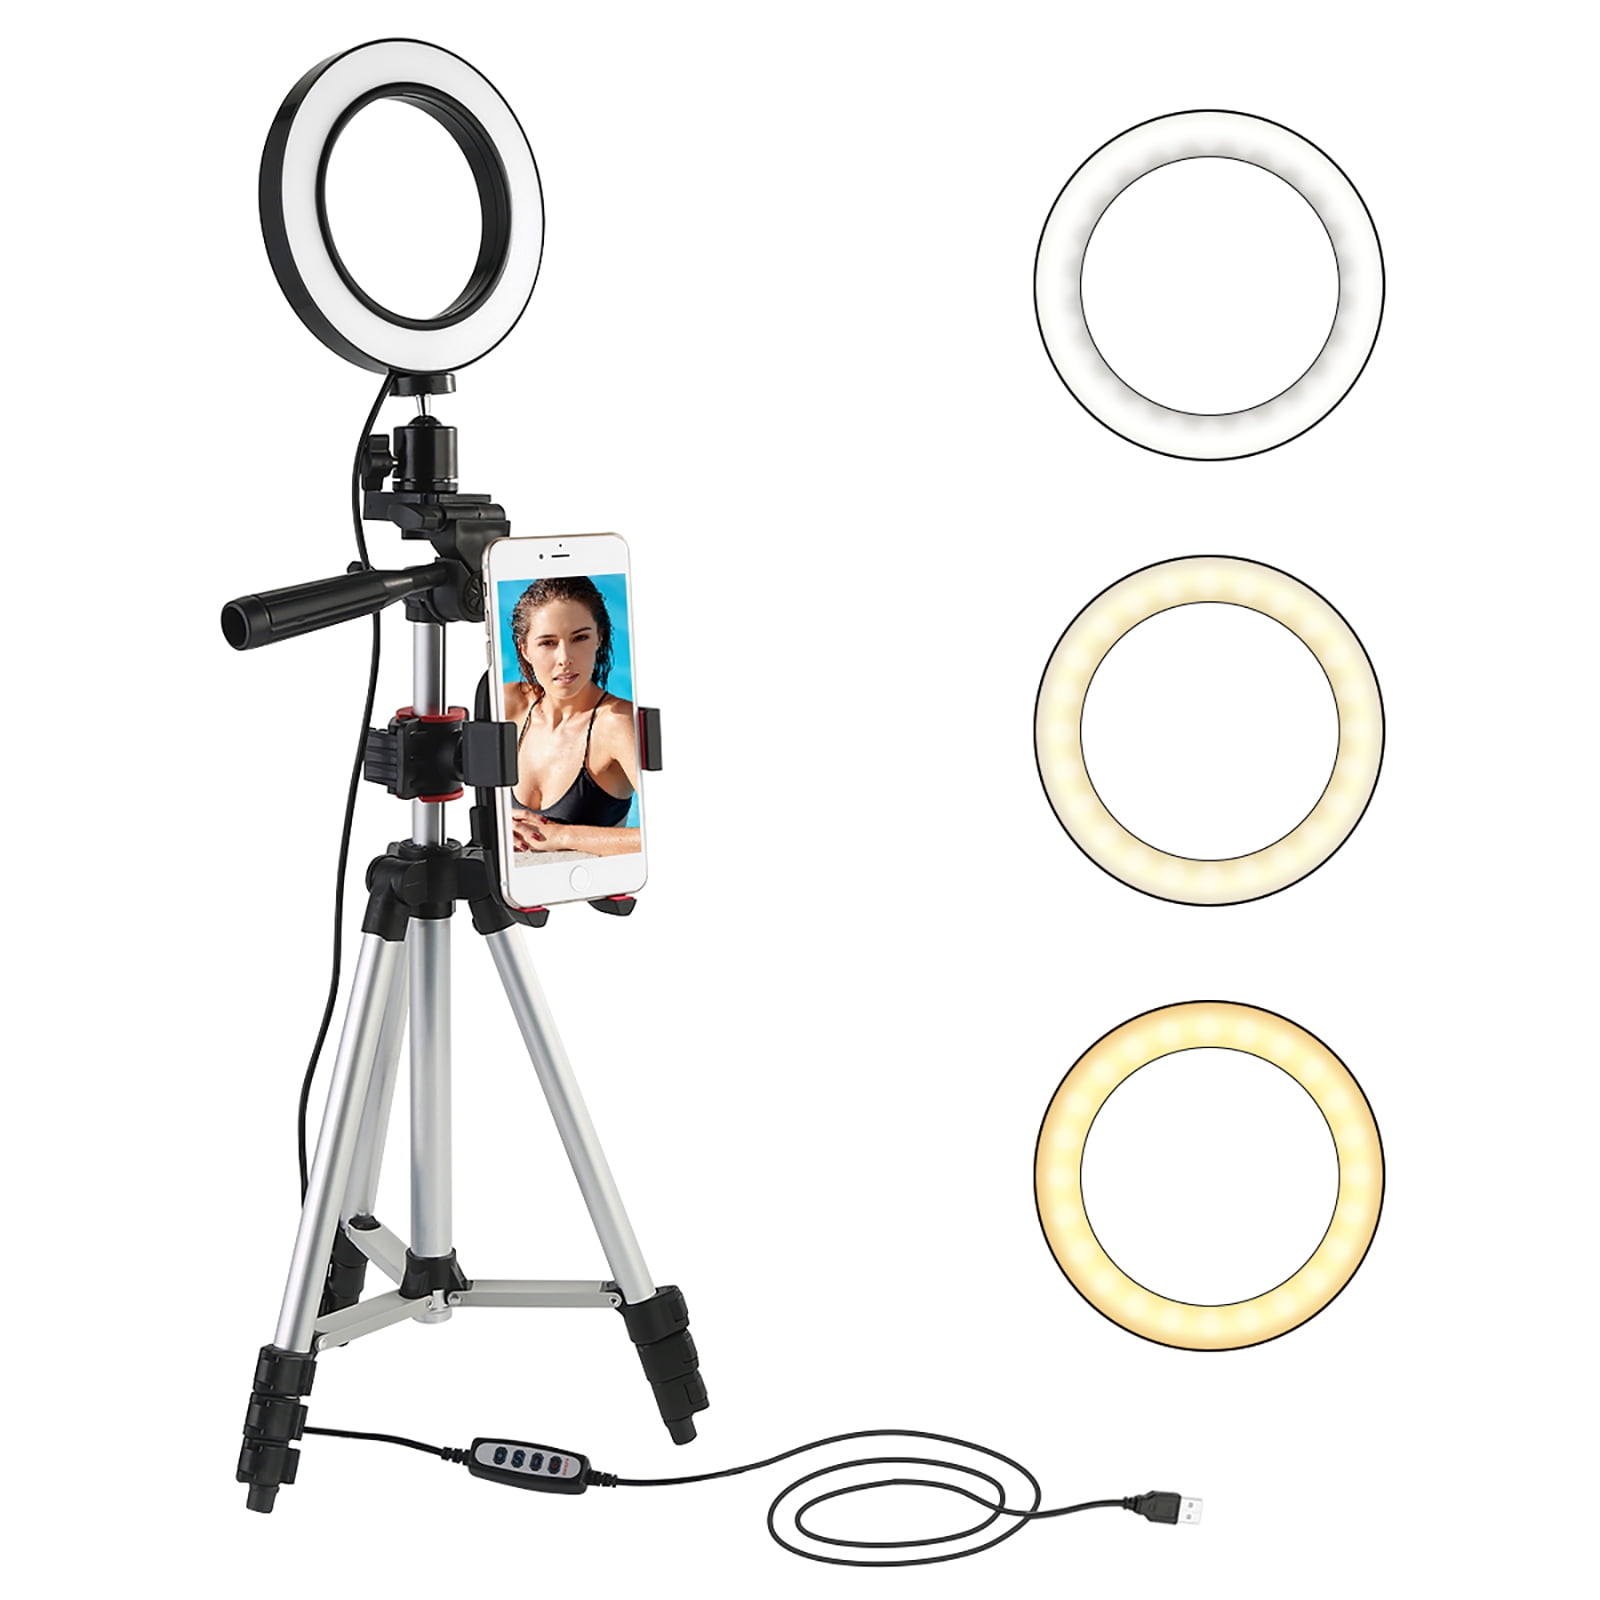 Selfie Ring Light with Tripod Stand with Tripod Mobile Phone Holder USB Port Jacksking 6 Inch Dimmable LED Video Ring Light Camera Lamp Kit